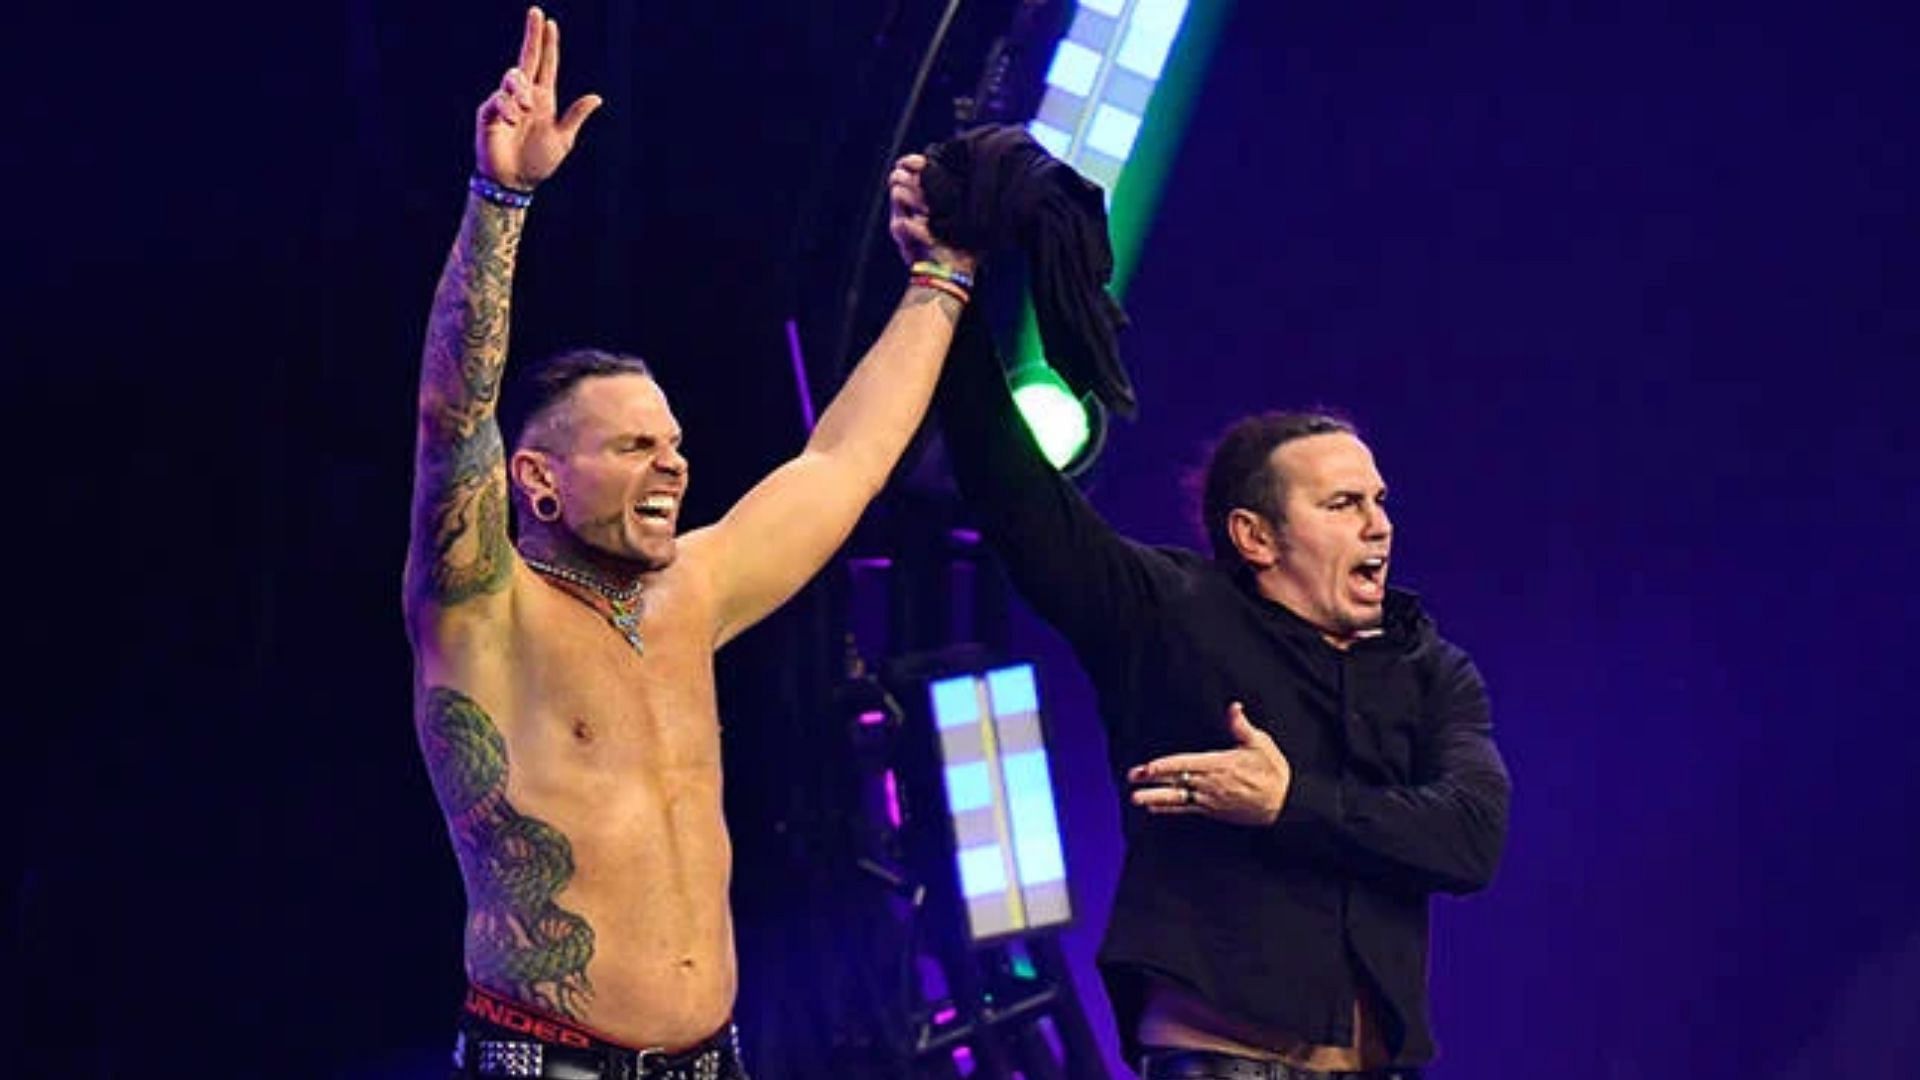 The Hardys reunited in March when Jeff joined All Elite Wrestling